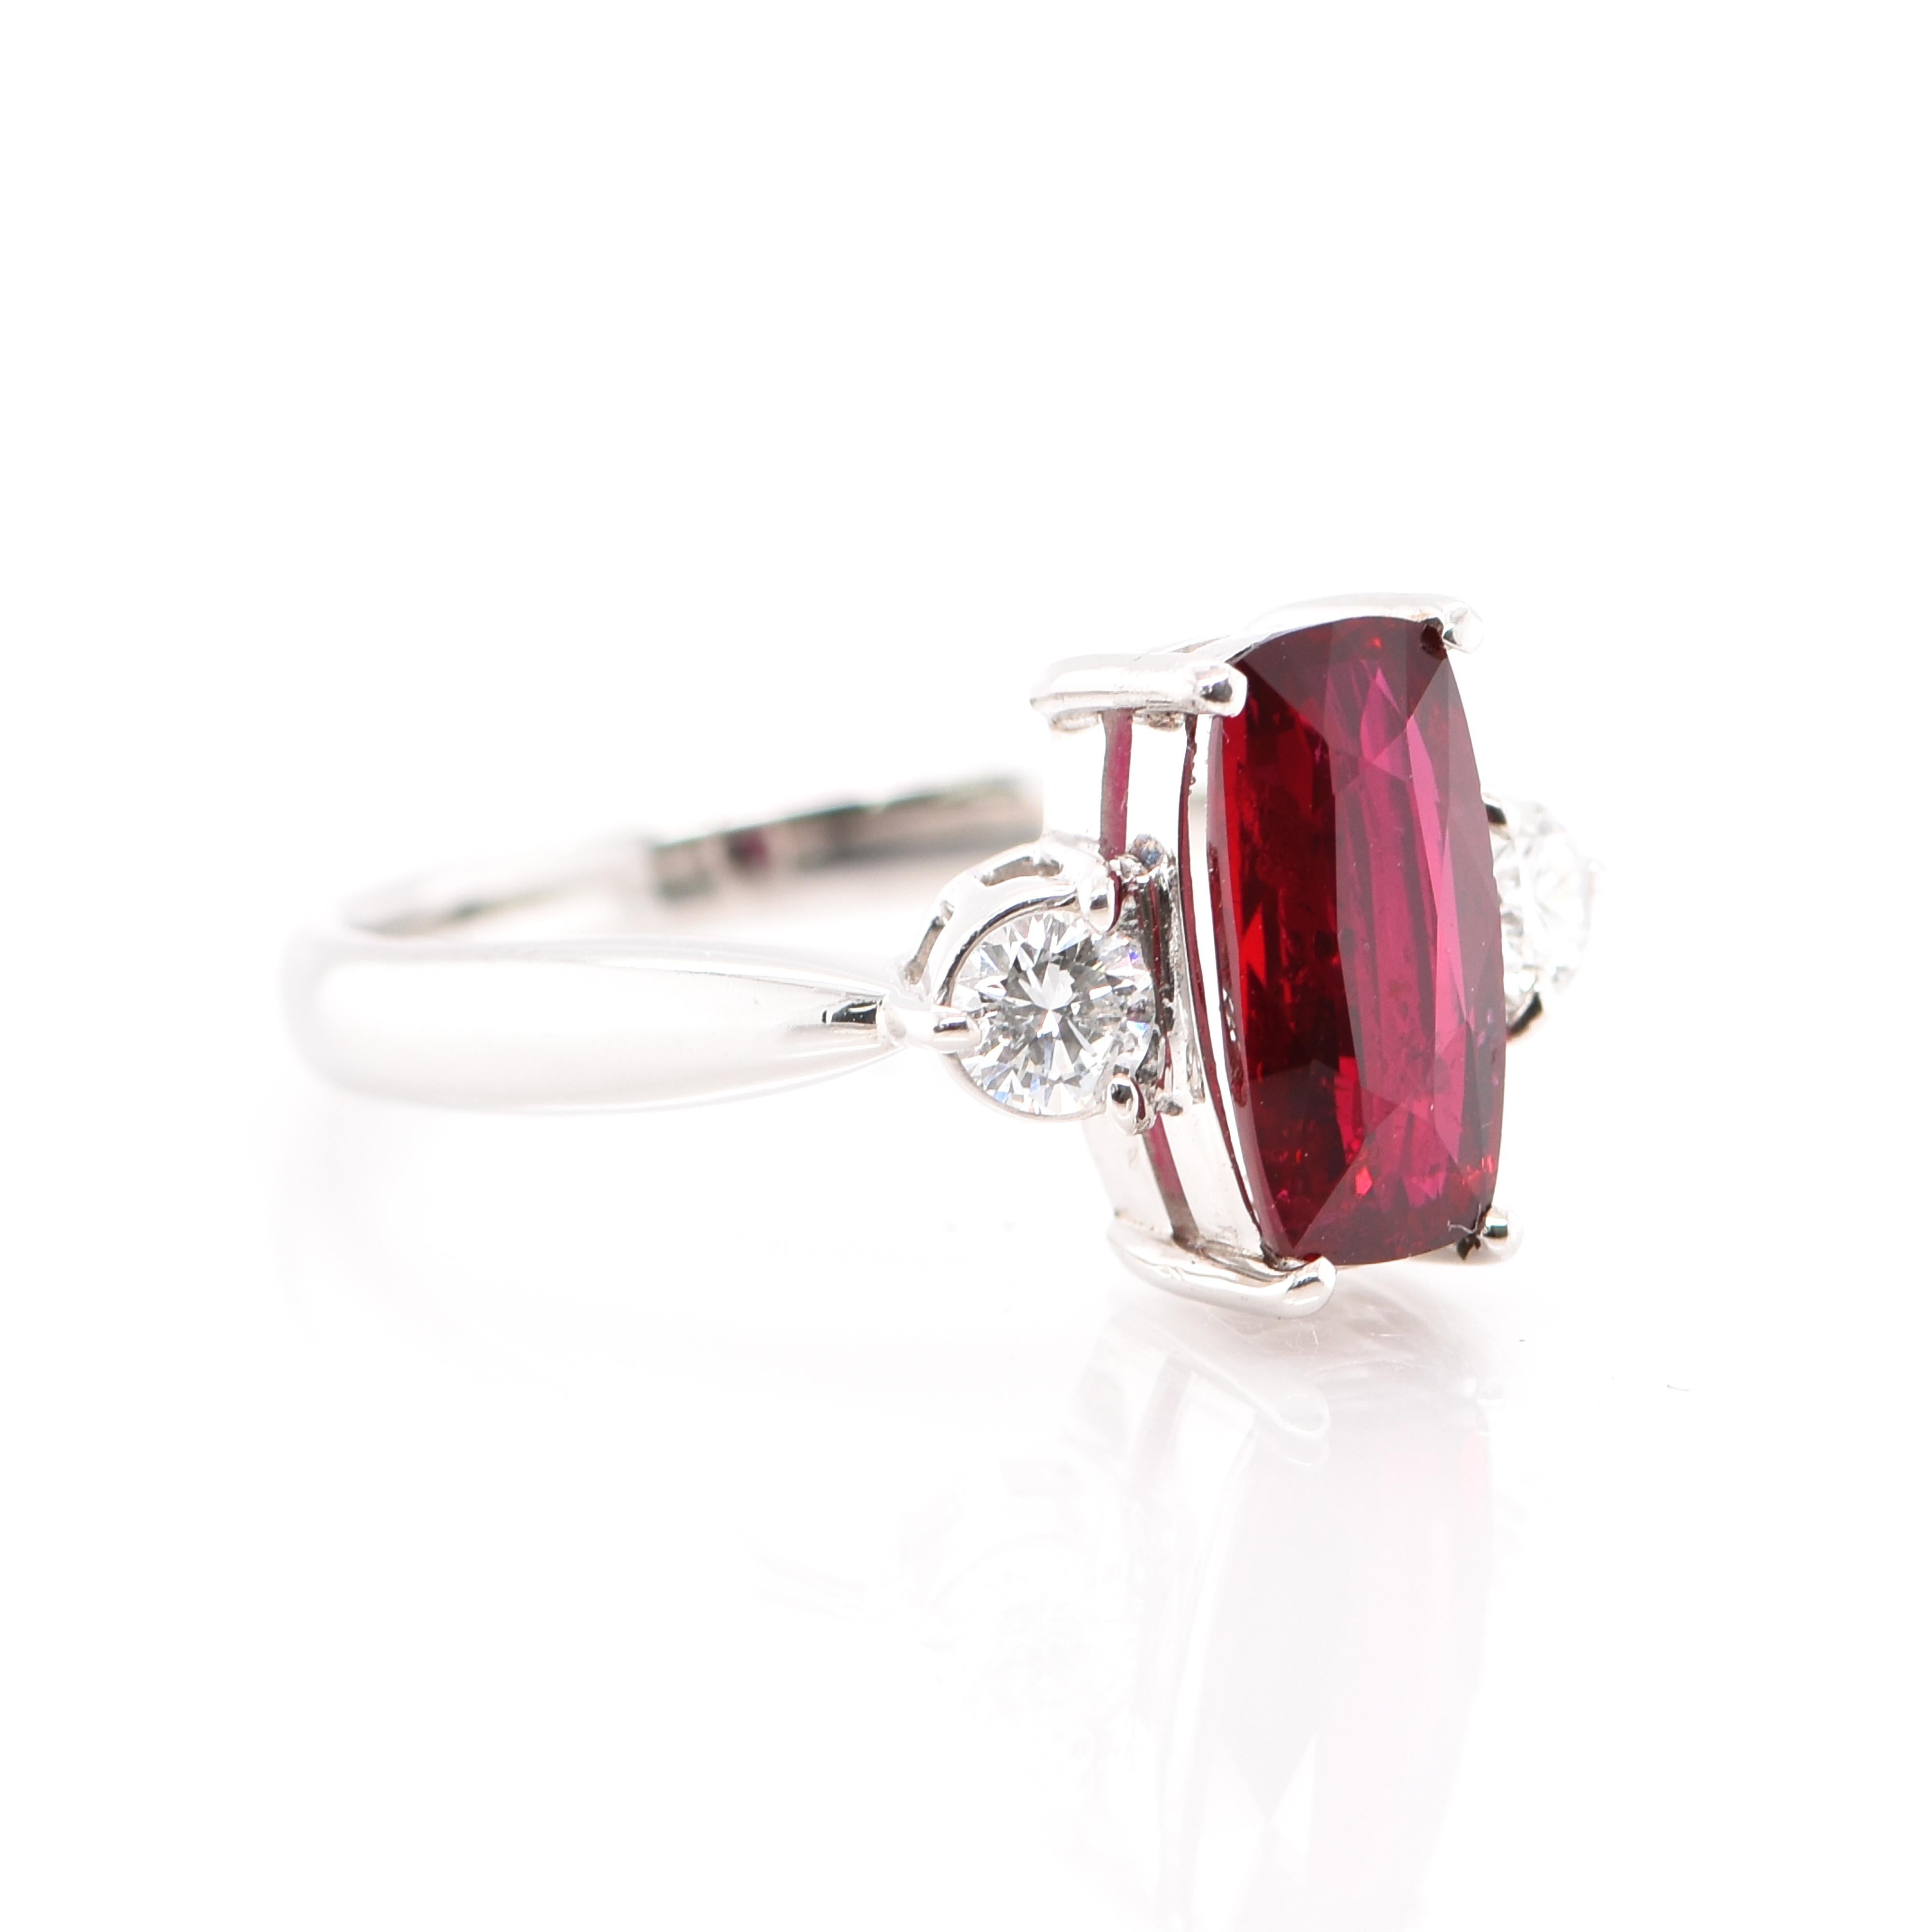 A beautiful Engagement Ring featuring a GIA Certified 2.019 Carat No Heat (Untreated) Ruby from Mozambique, Africa and 0.96 Carats of Diamond Accents set in Platinum. Rubies are referred to as 